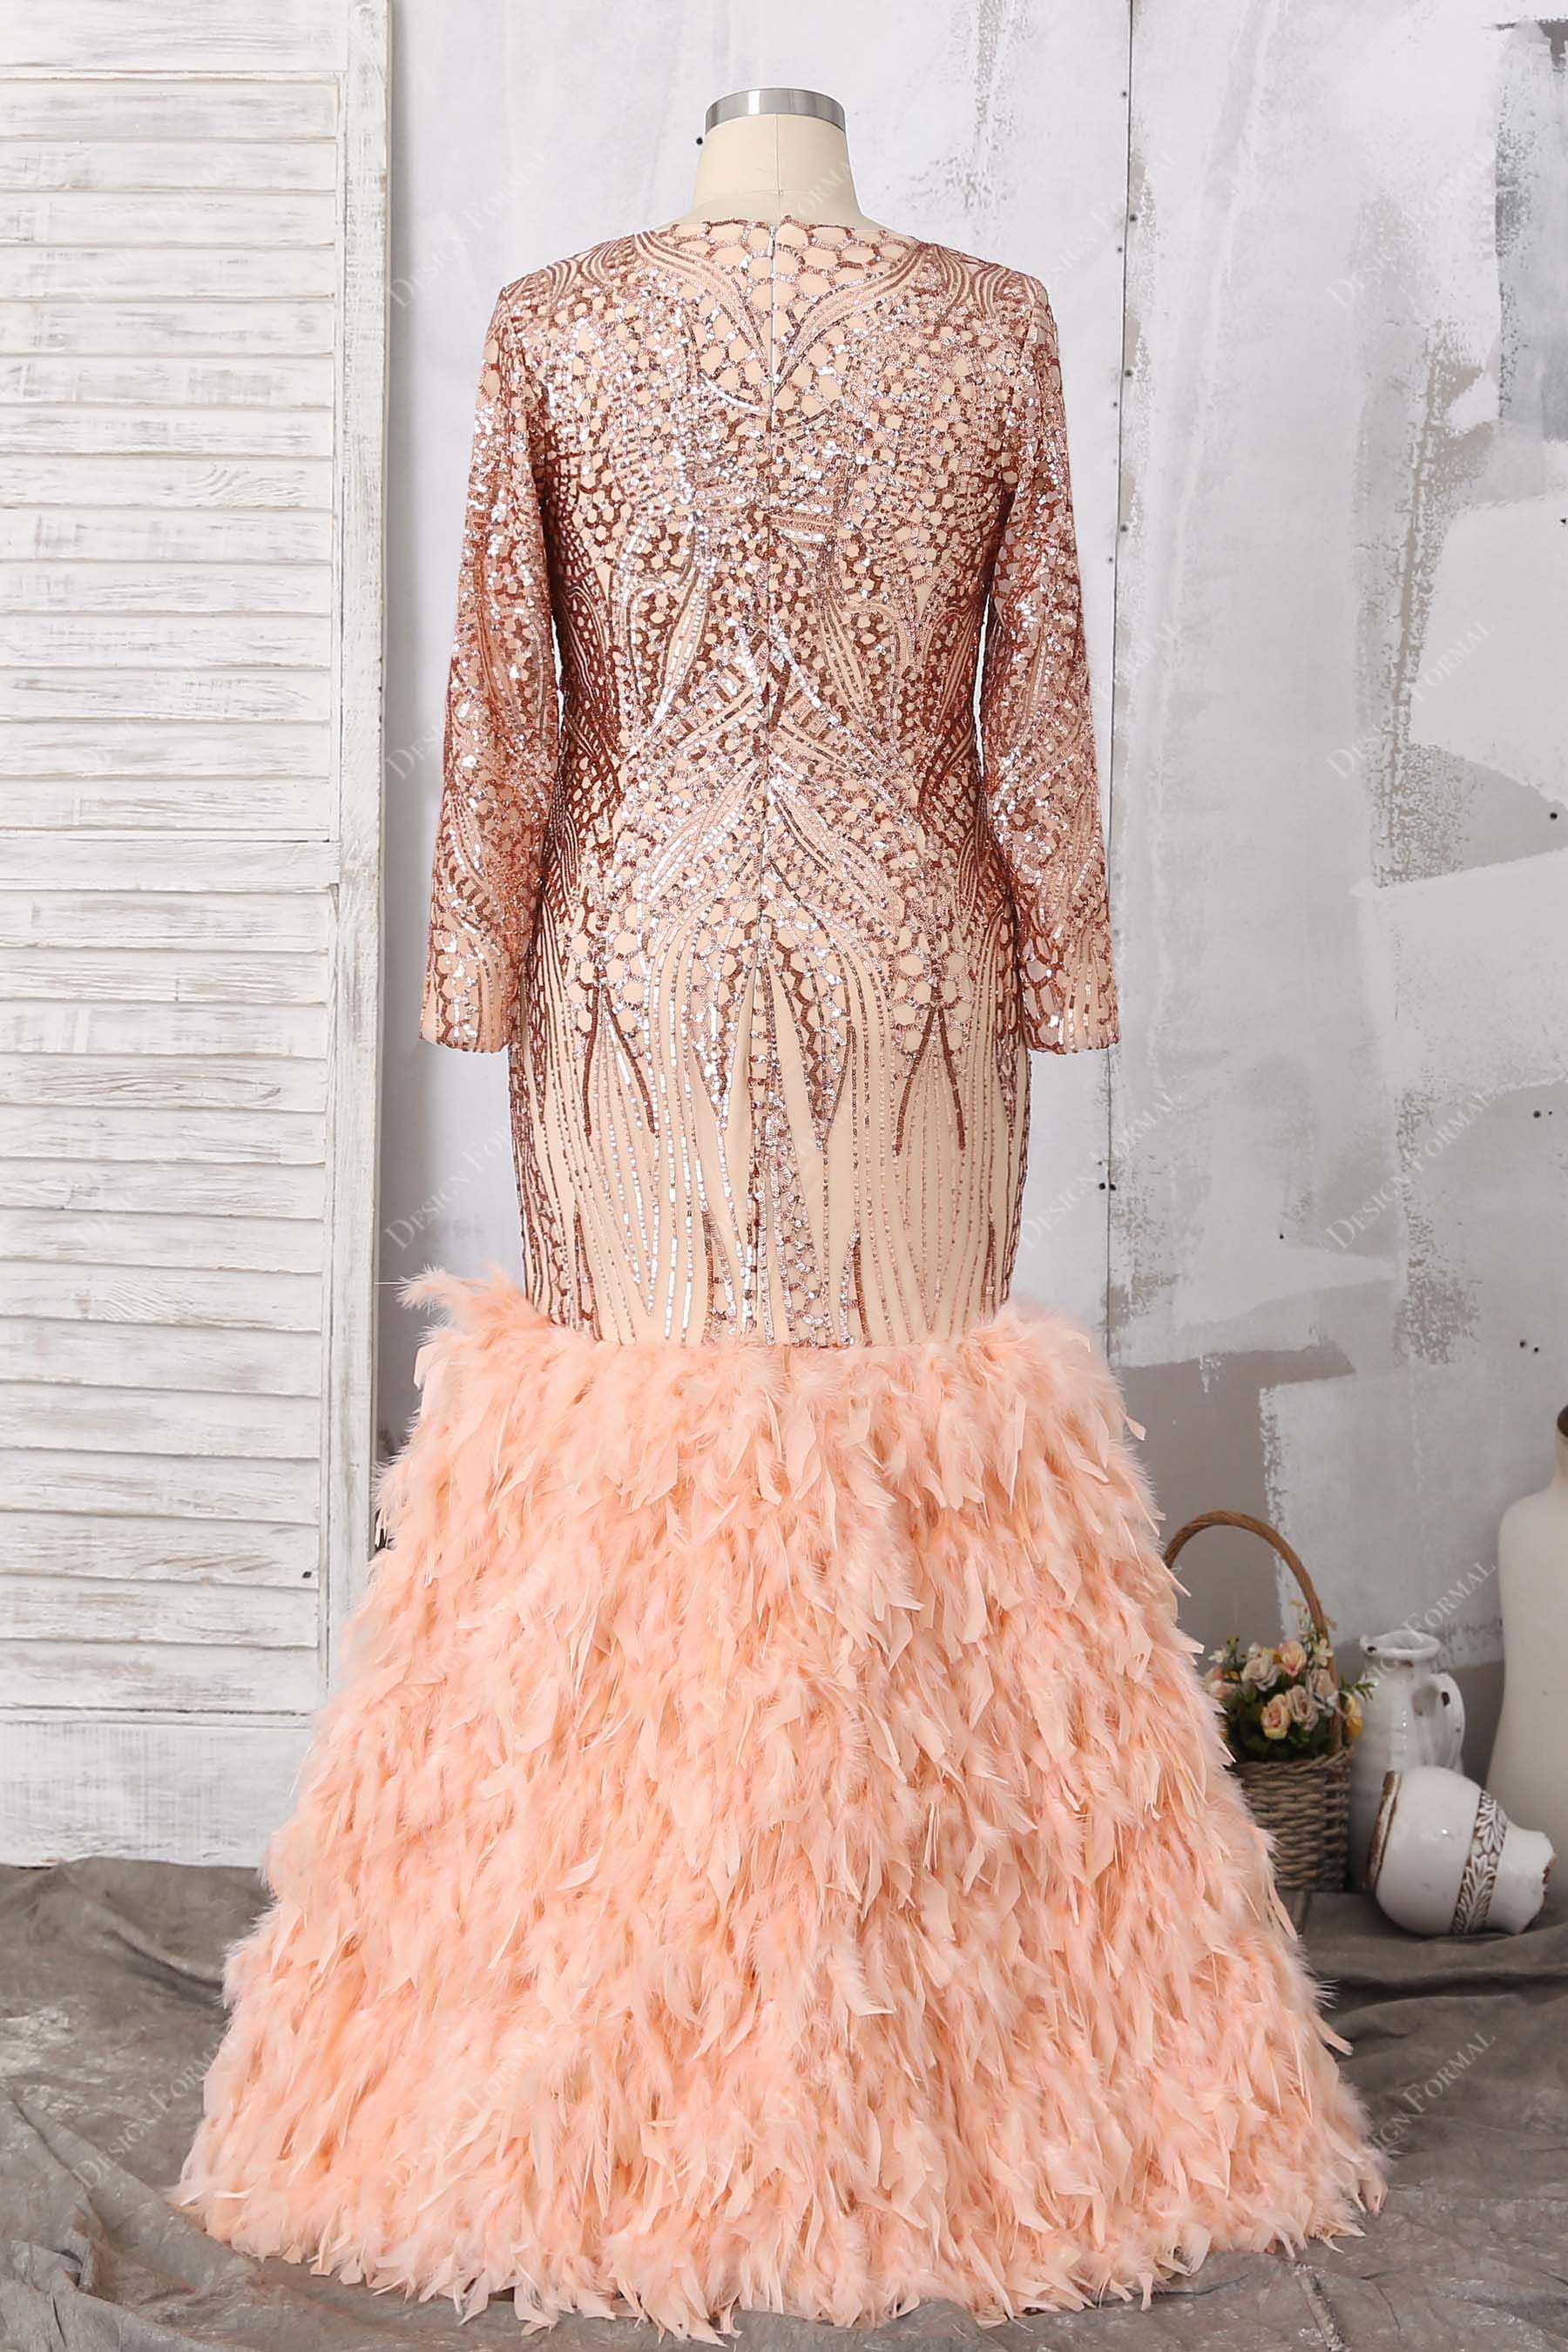 Rose Gold Sequin Dress - Brittany Nicole